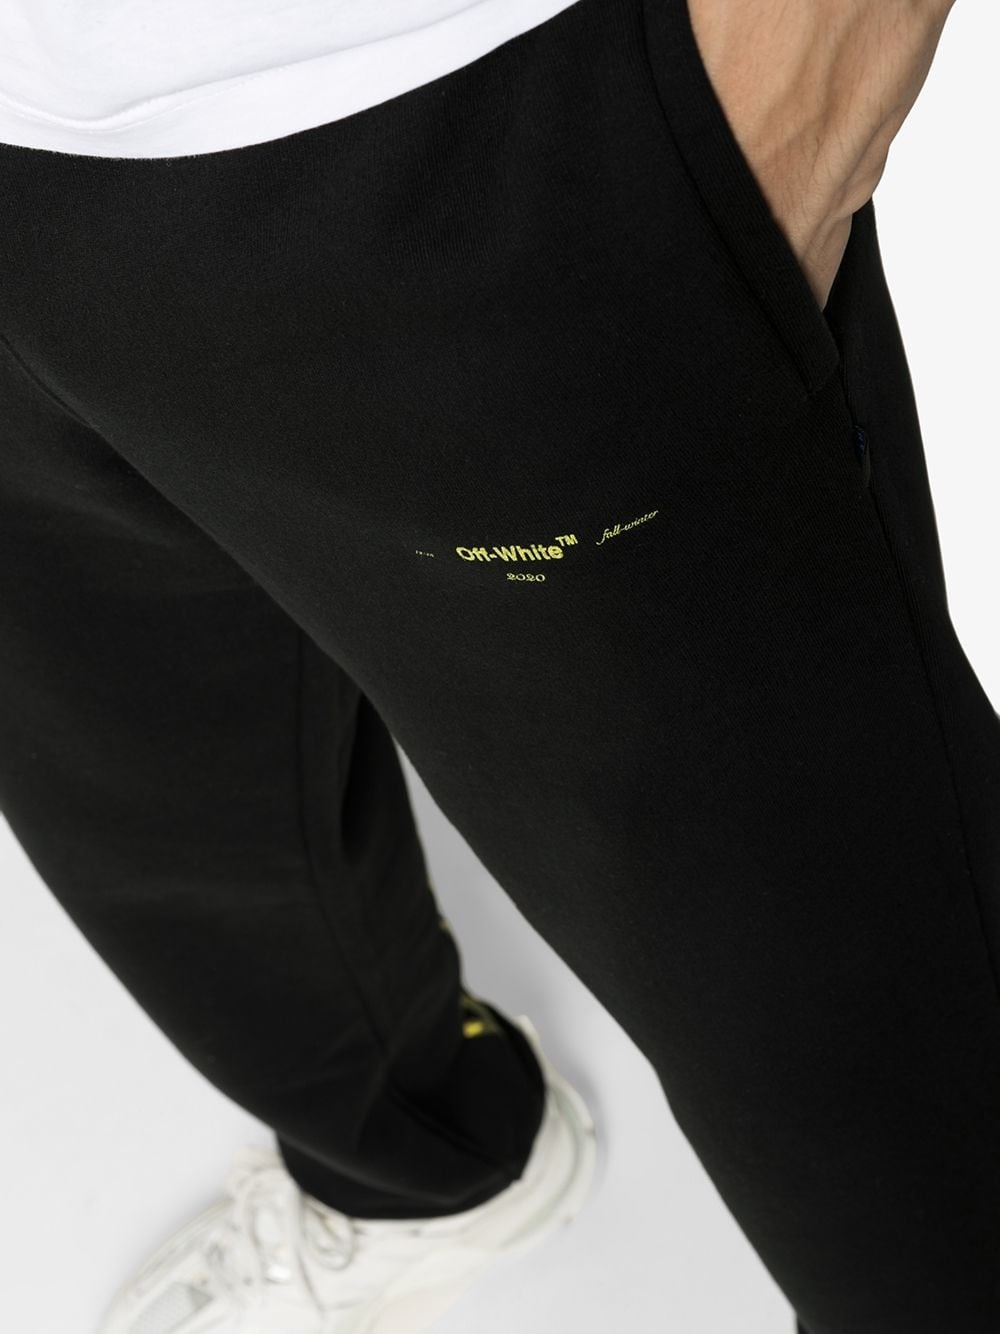 off-white ARROWS SLIM TROUSERS available on montiboutique.com - 31221